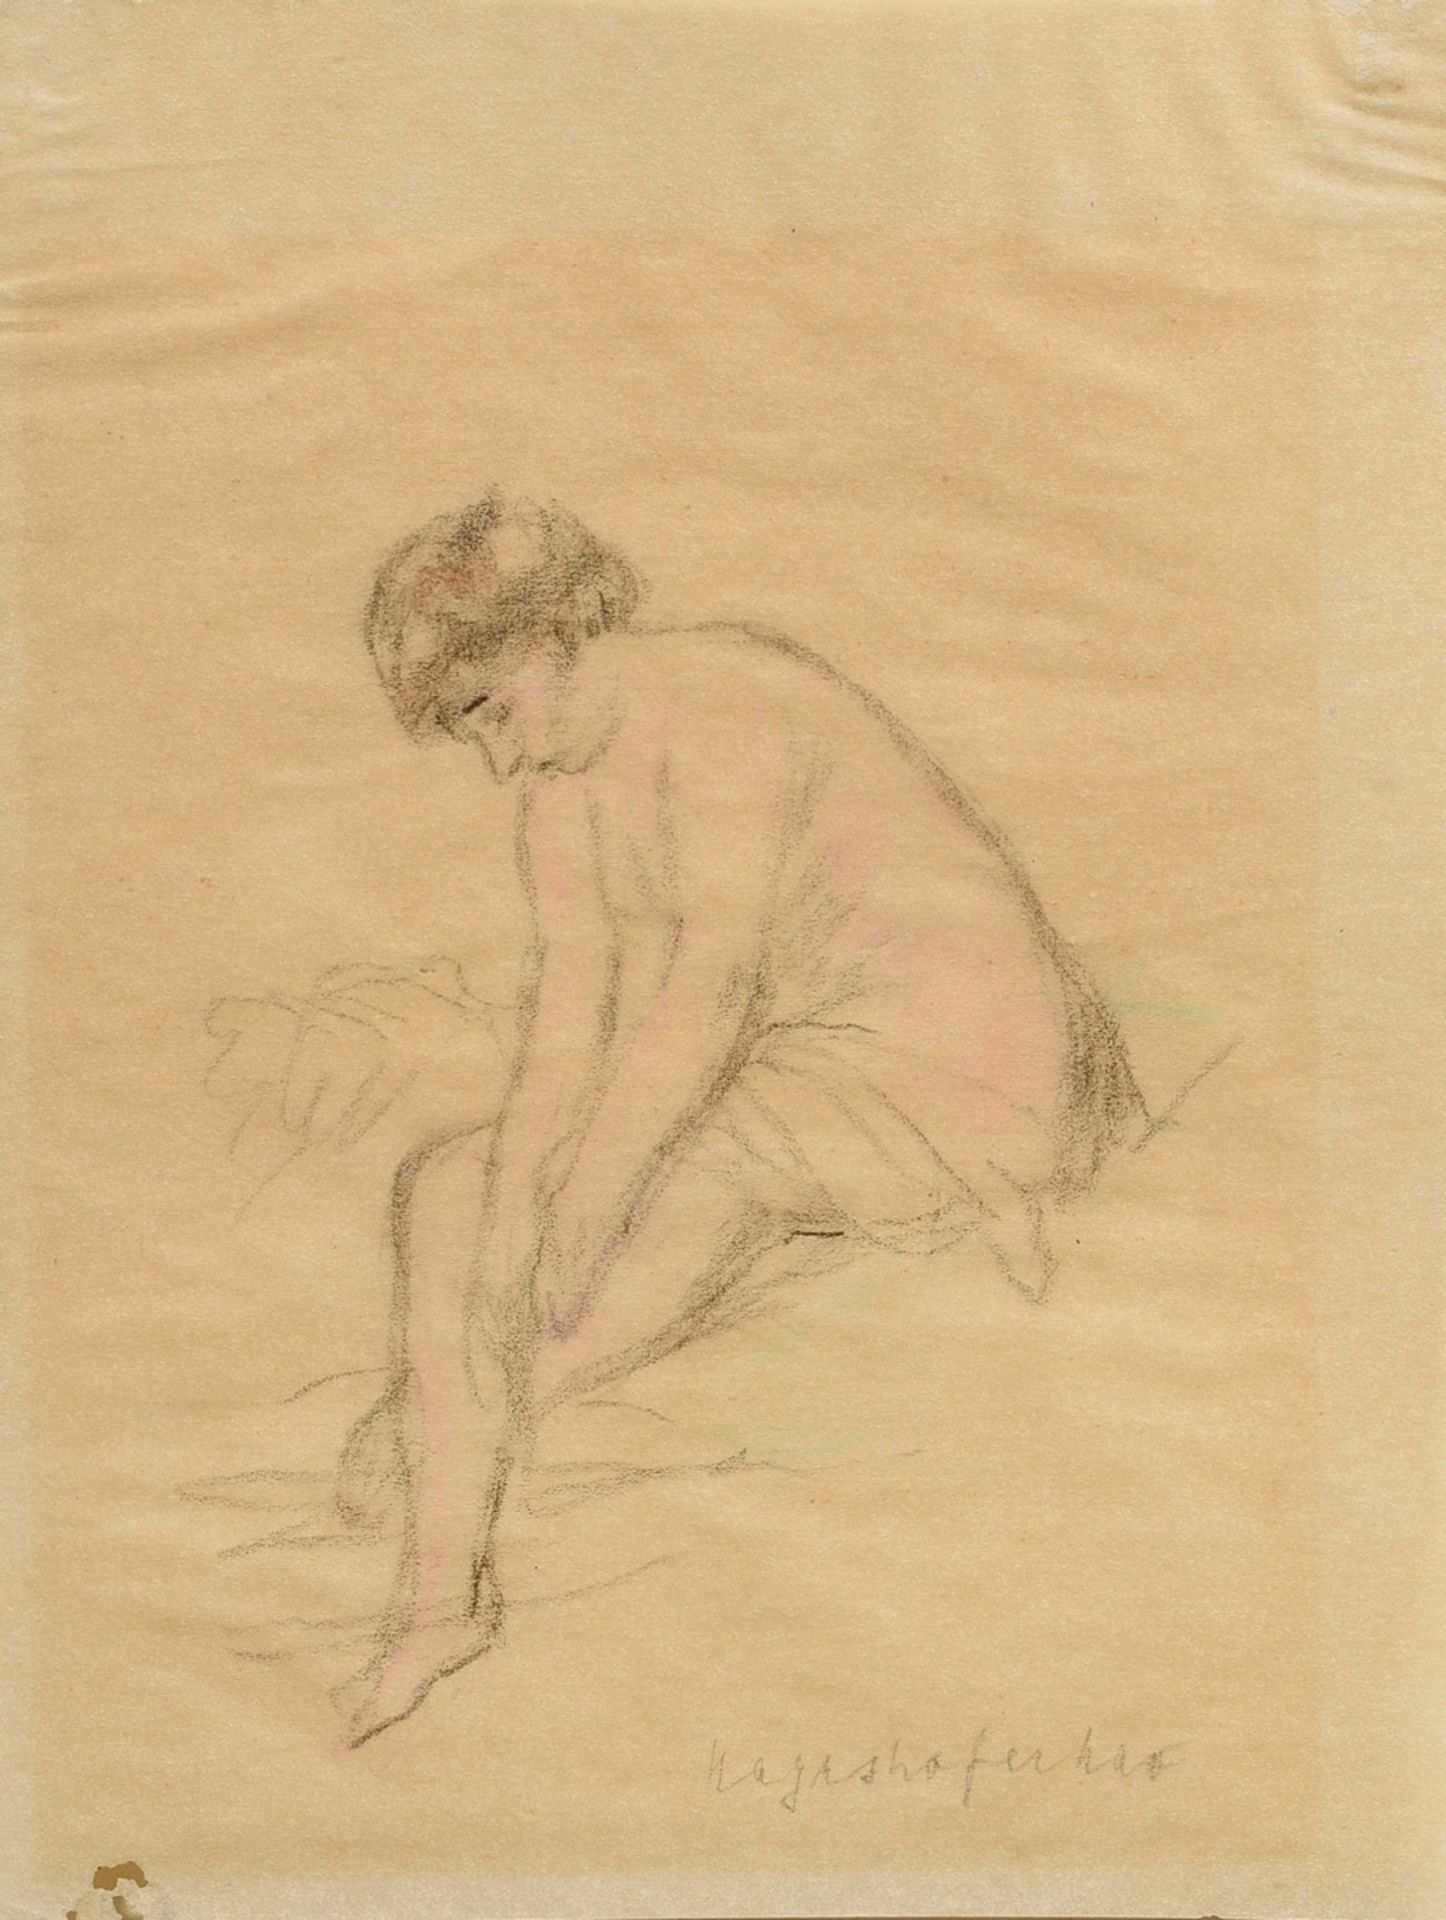 17 Mayershofer, Max (1875-1950) "Female nude drawings", charcoal, each sign., each mounted in passe - Image 15 of 19